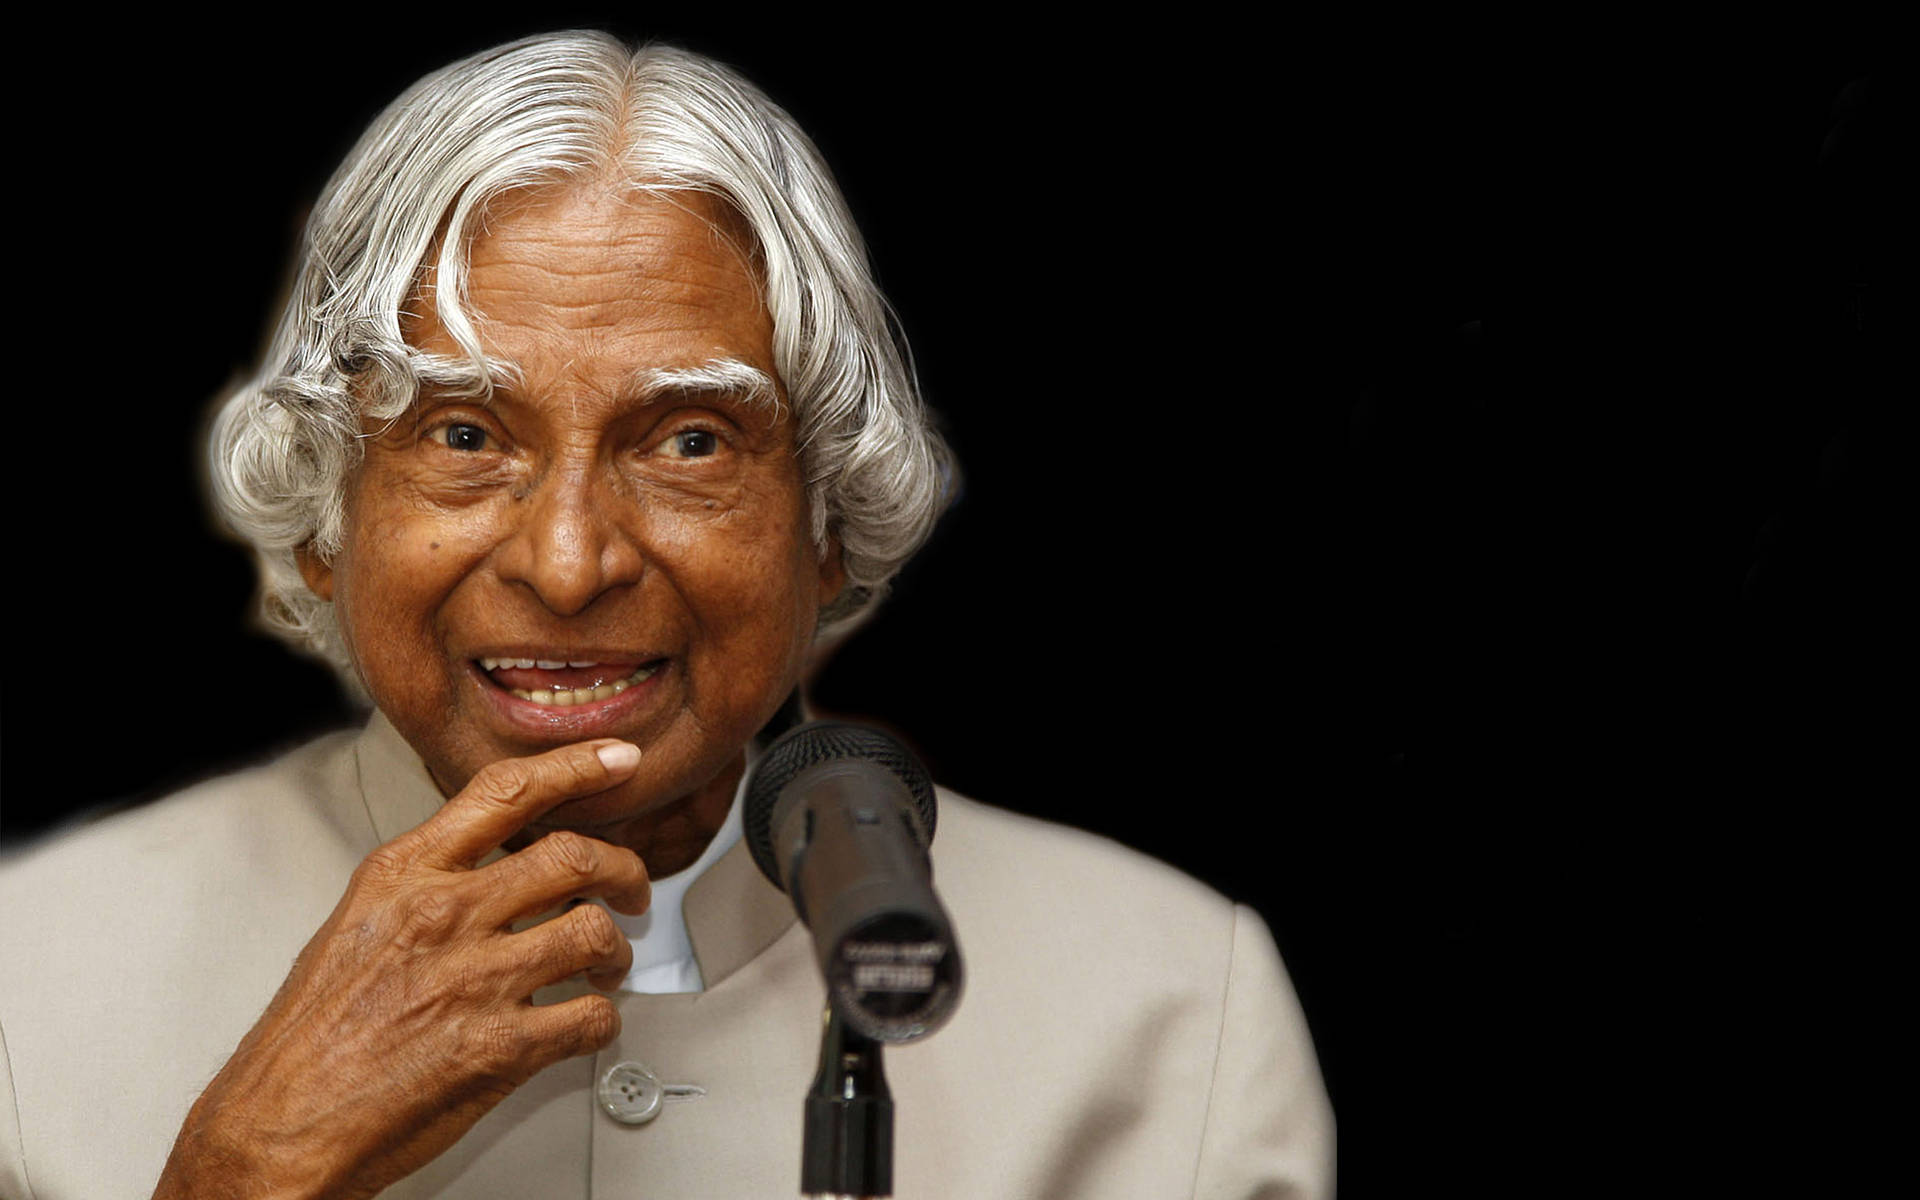 Abdul Kalam Hd Science Enthusiast Background